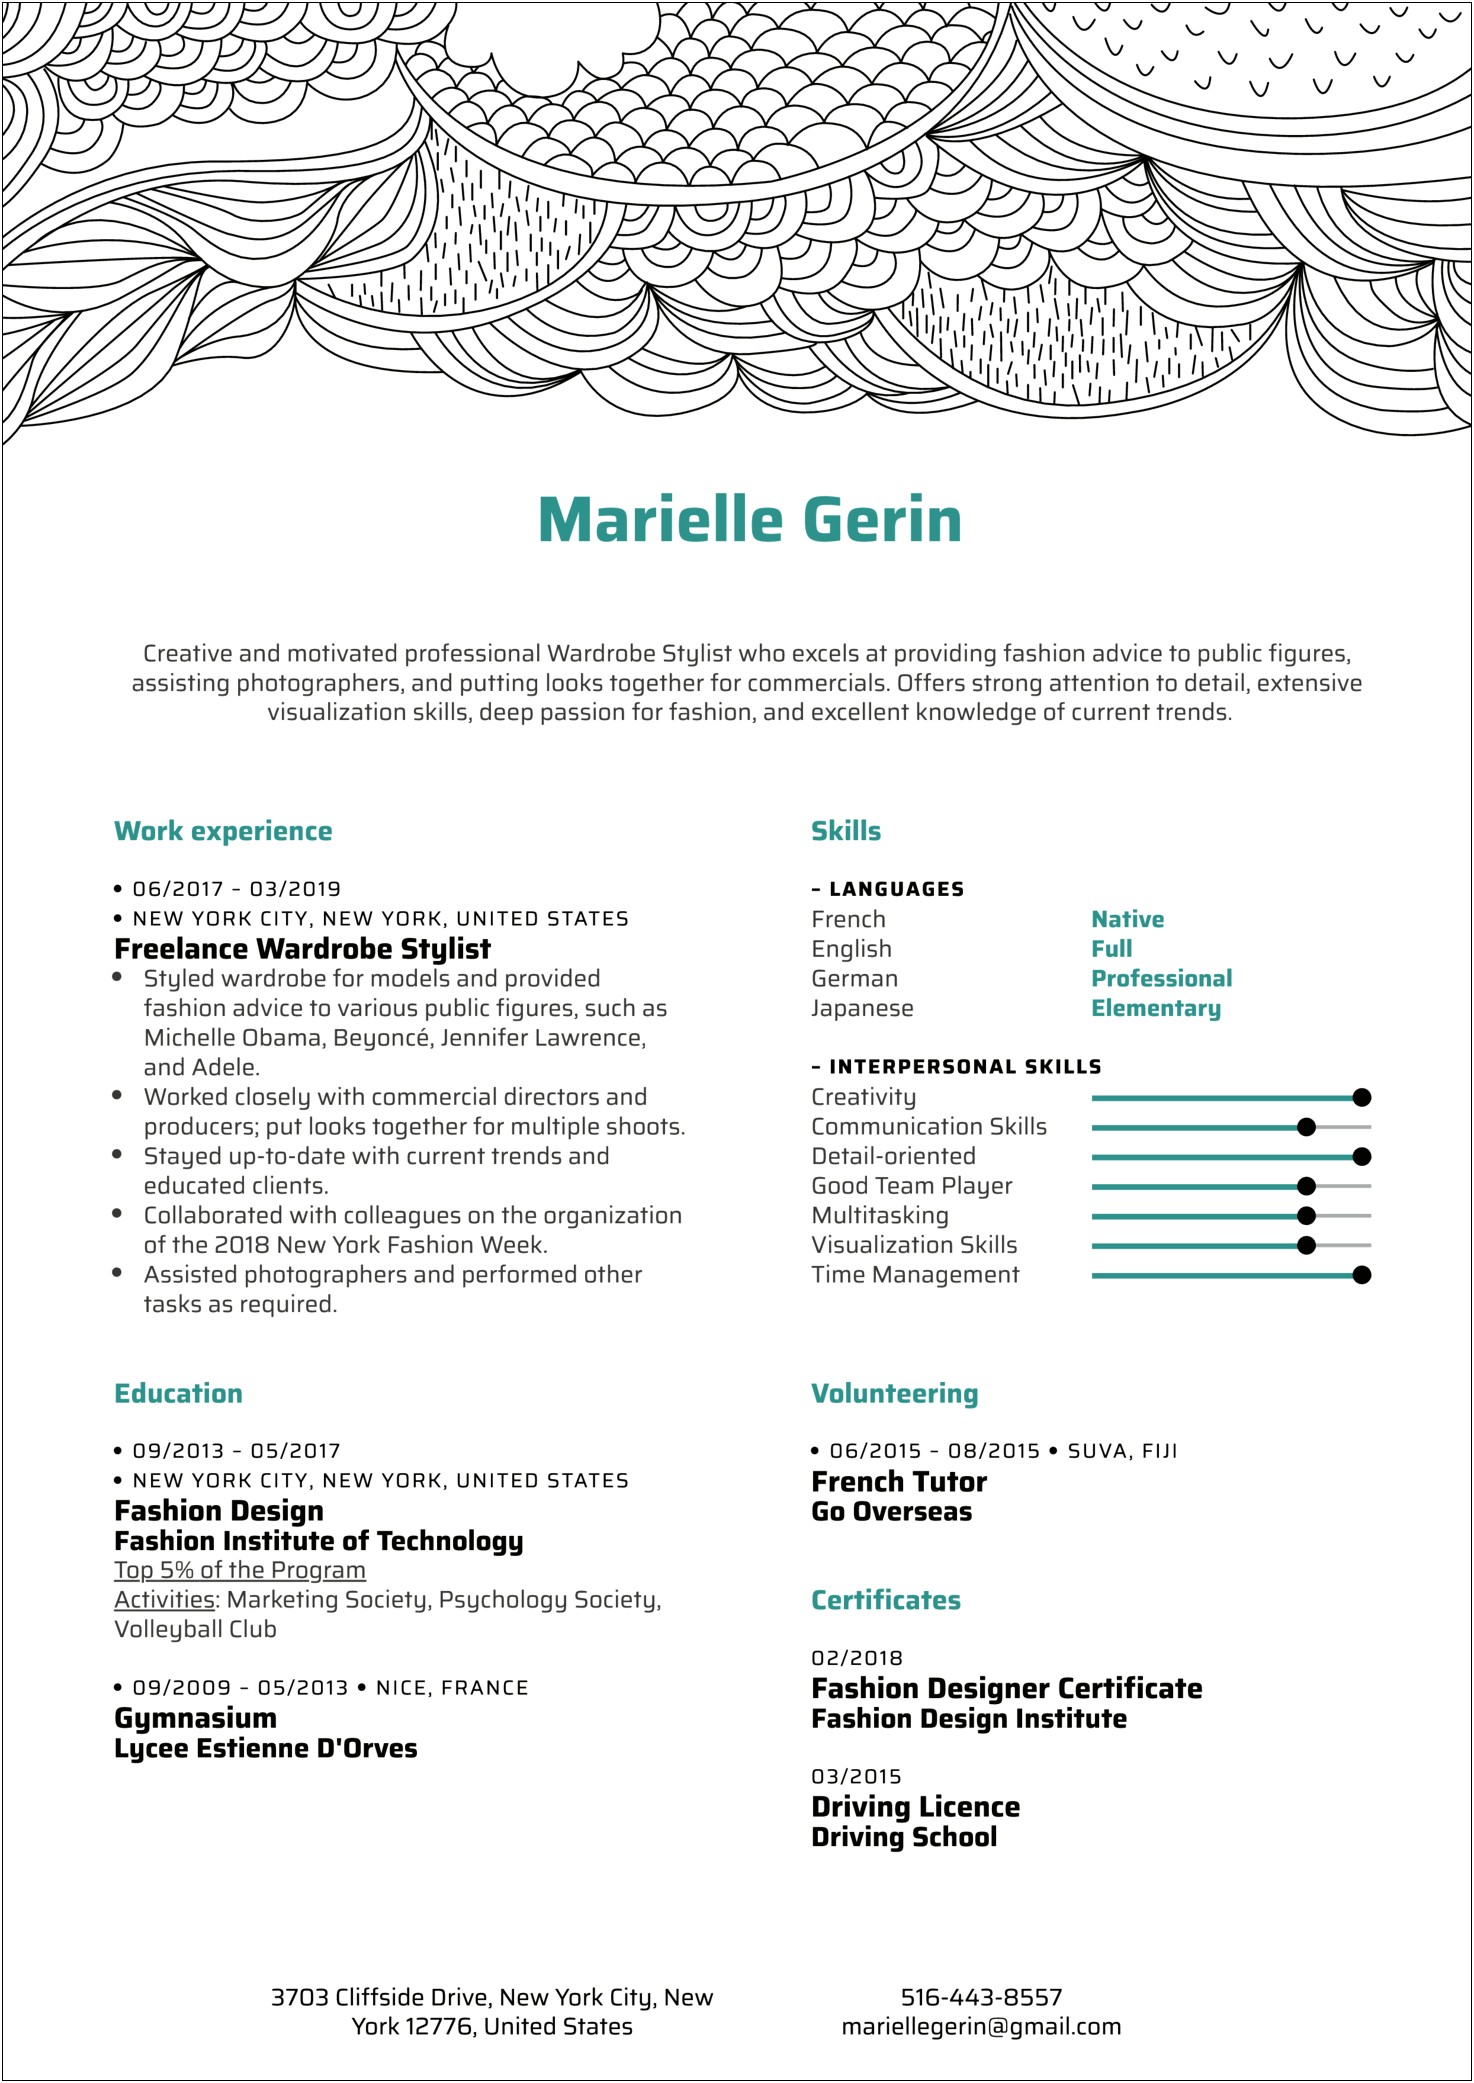 Sample Resumes For Fashion Styling